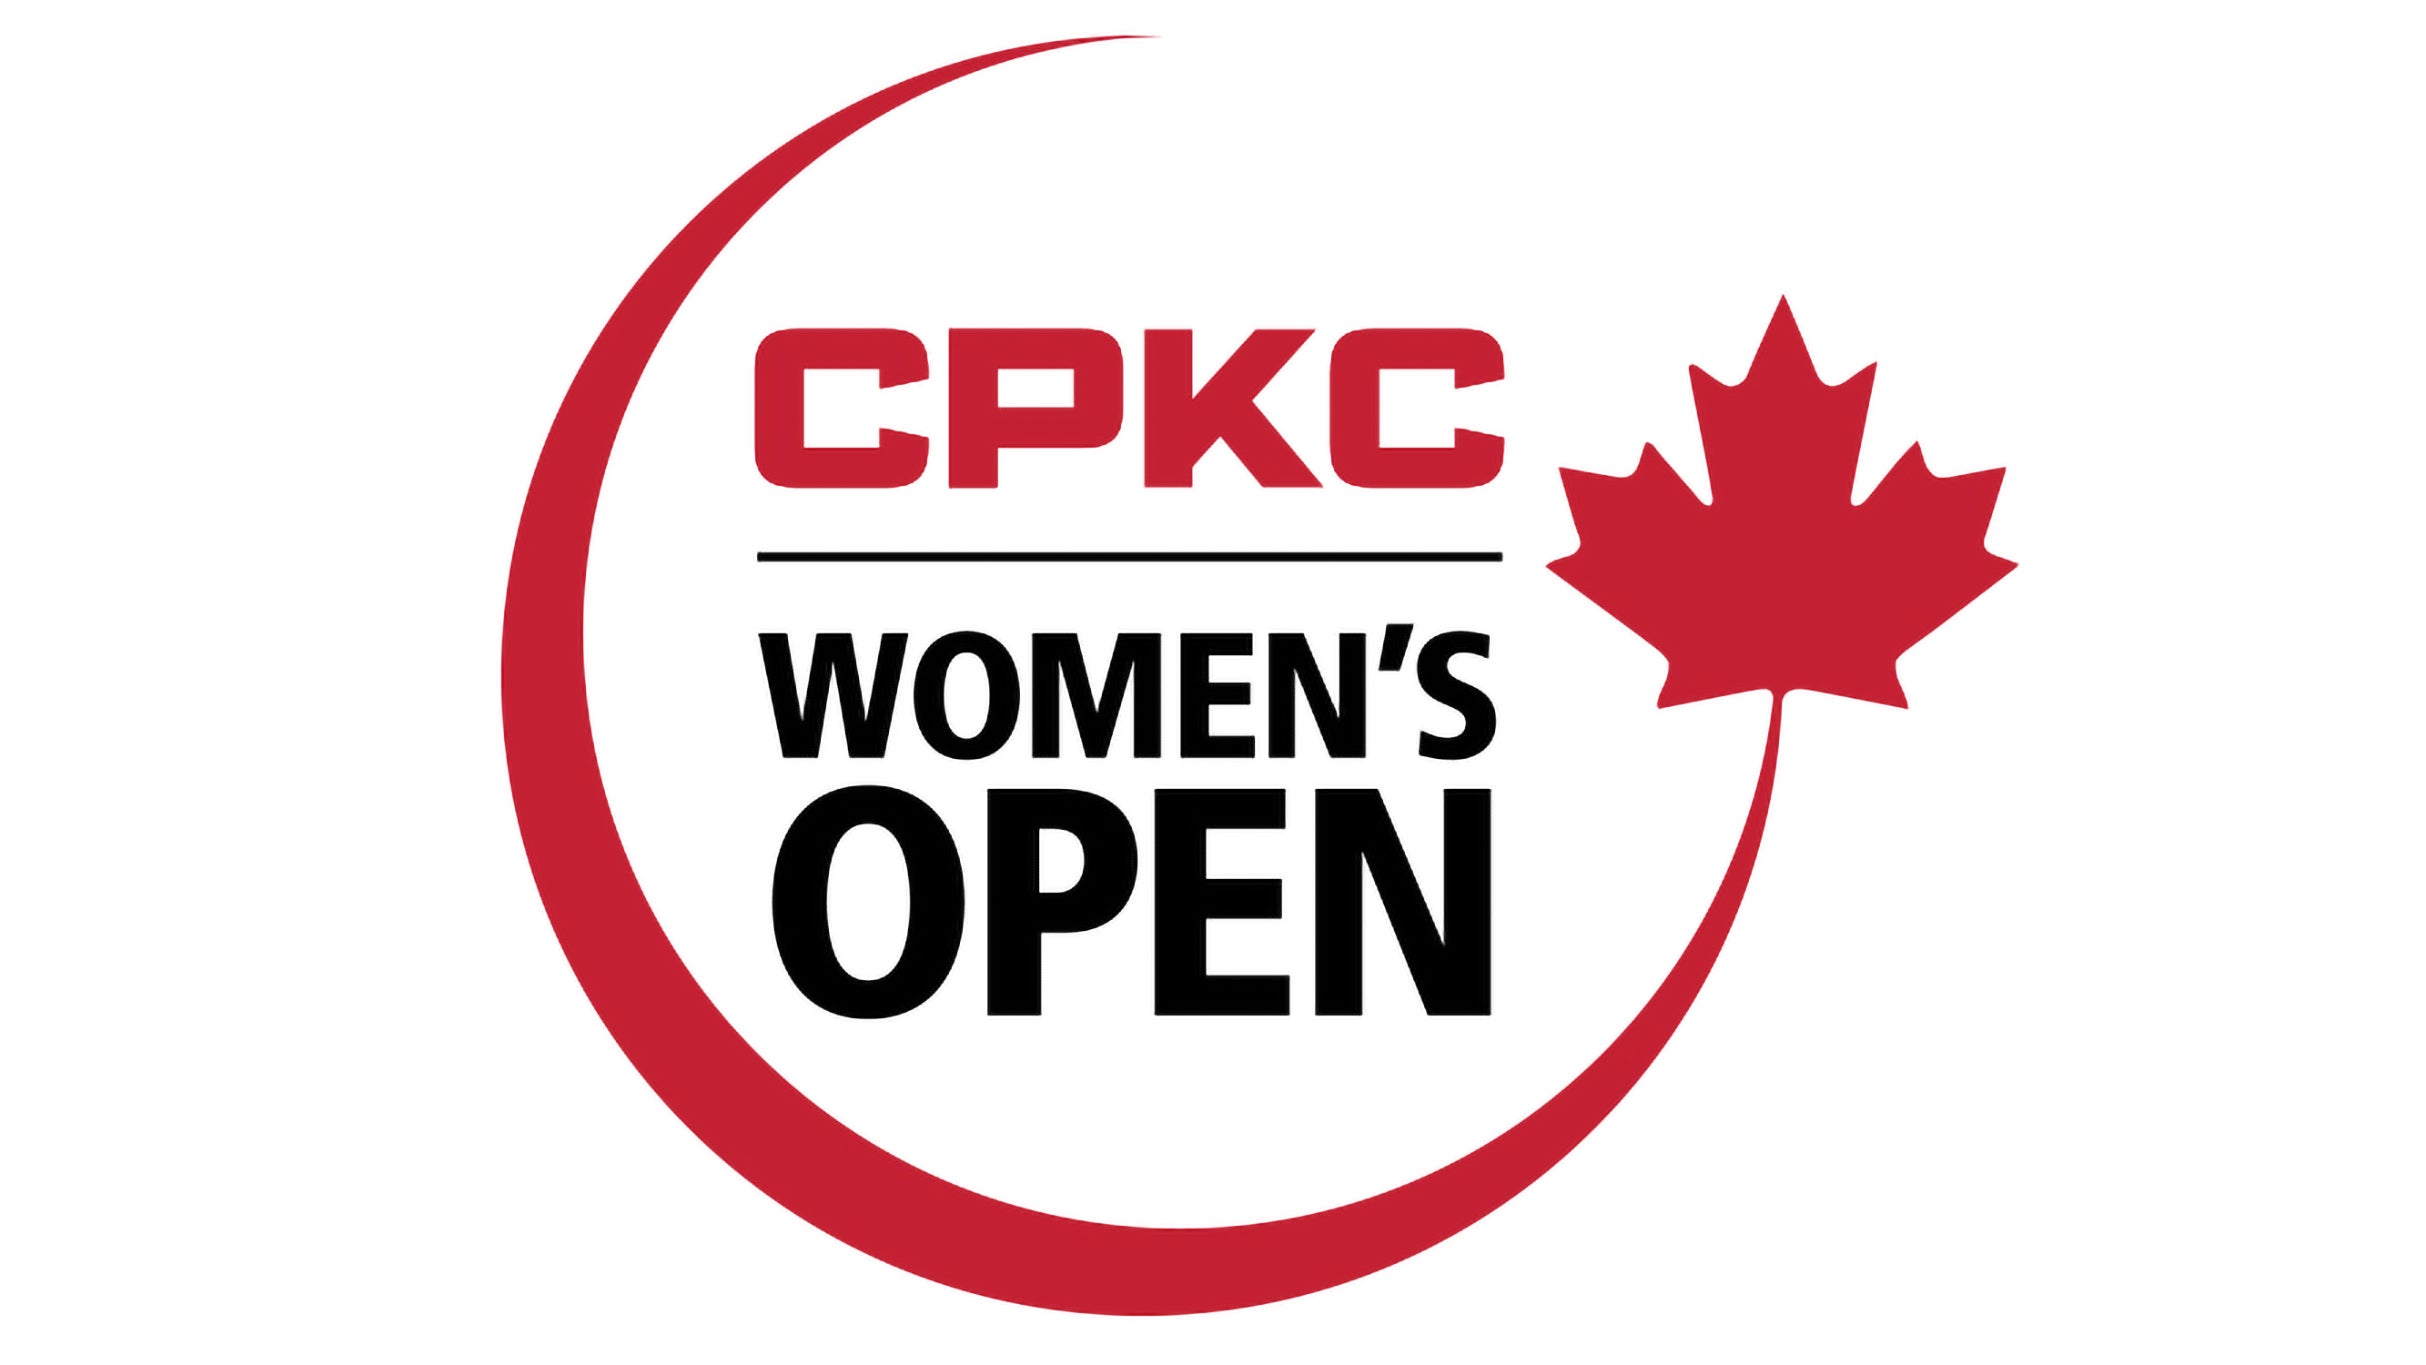 CPKC Women's Open Early Week Any One Day Grounds Pass (Tues-Wed) in Vancouver promo photo for Golf Canada Partner presale offer code